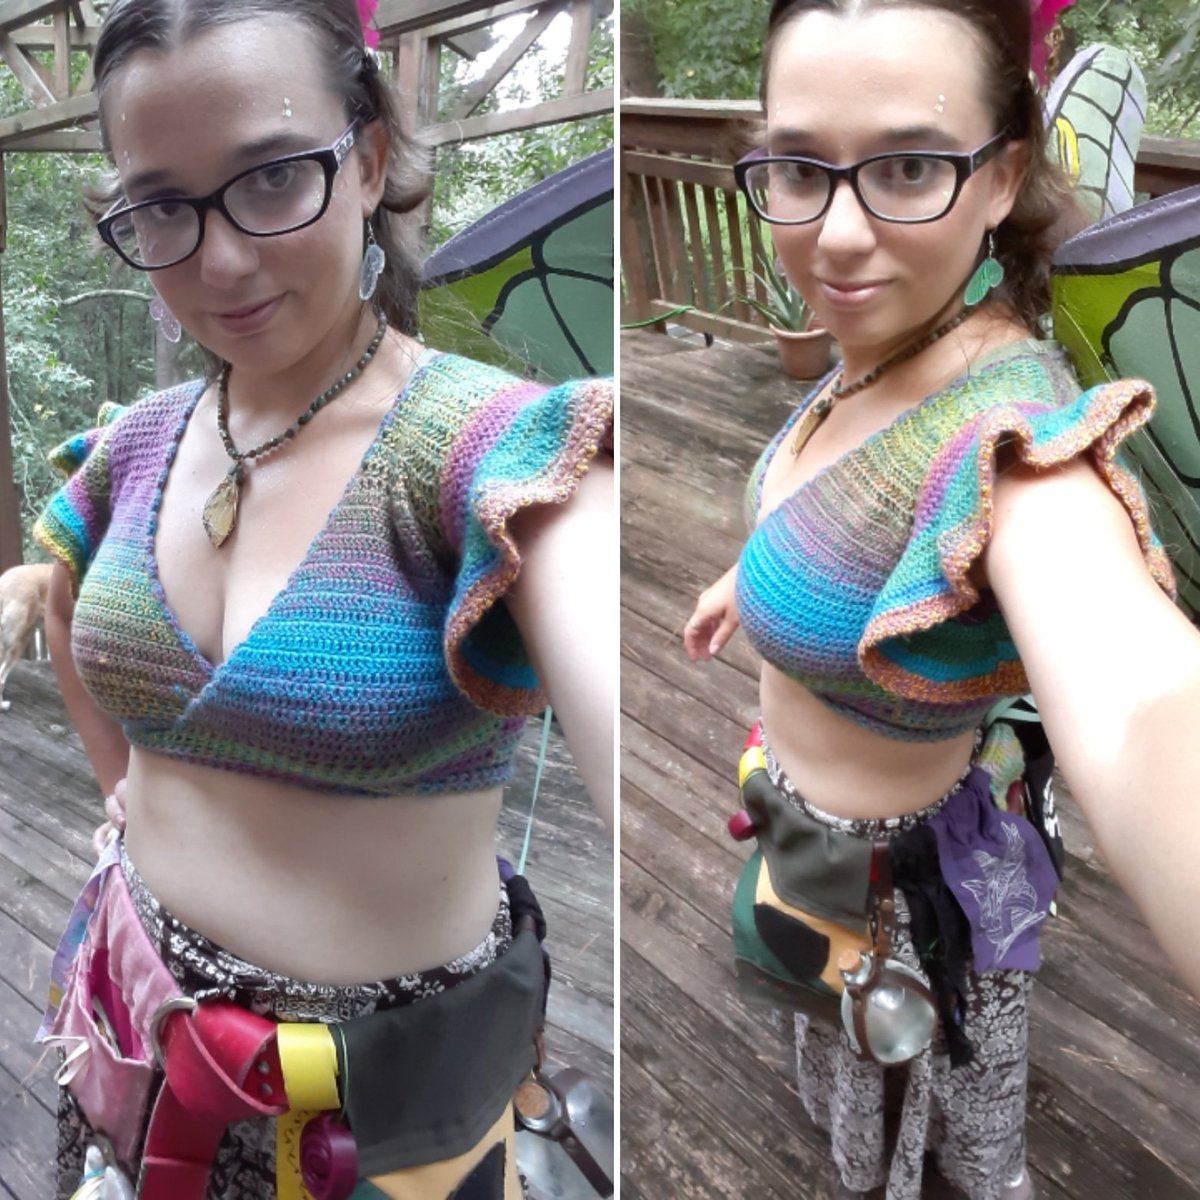 I really love this crocheted top I made!  The colors are so happy! This was right before #amtgard a few weeks ago. 
🧶🧶🧶🧶🧶🧶🧶
#thelarpfaeries #crochet #crochettop #happycolors #larp #liveactionroleplay #amtgard #beltflag